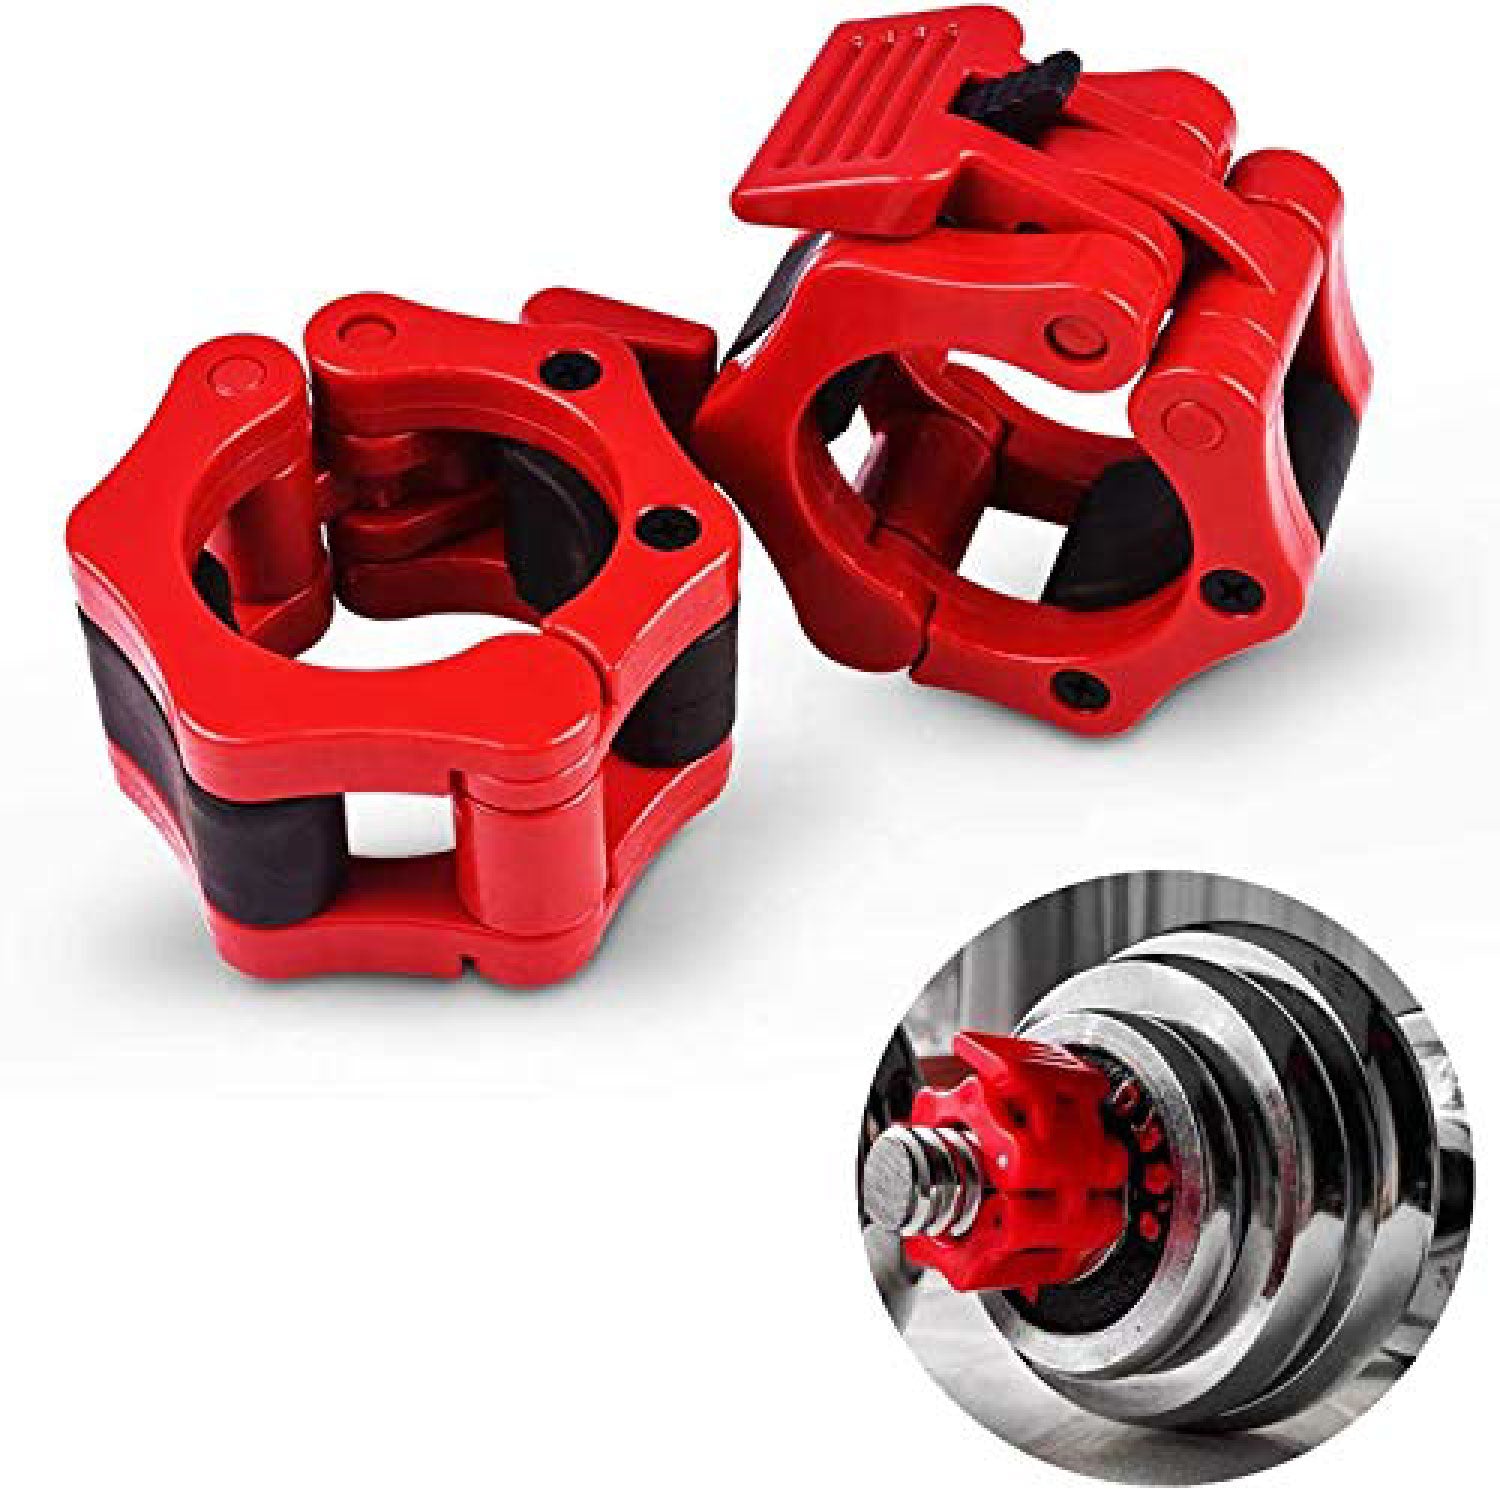 Iron Lab Olympic Barbell Collar Pair - 2" Inch Pro ABS Locking Set of 2 Black Clamps Perfect for Pro Crossfit Strong Lifts